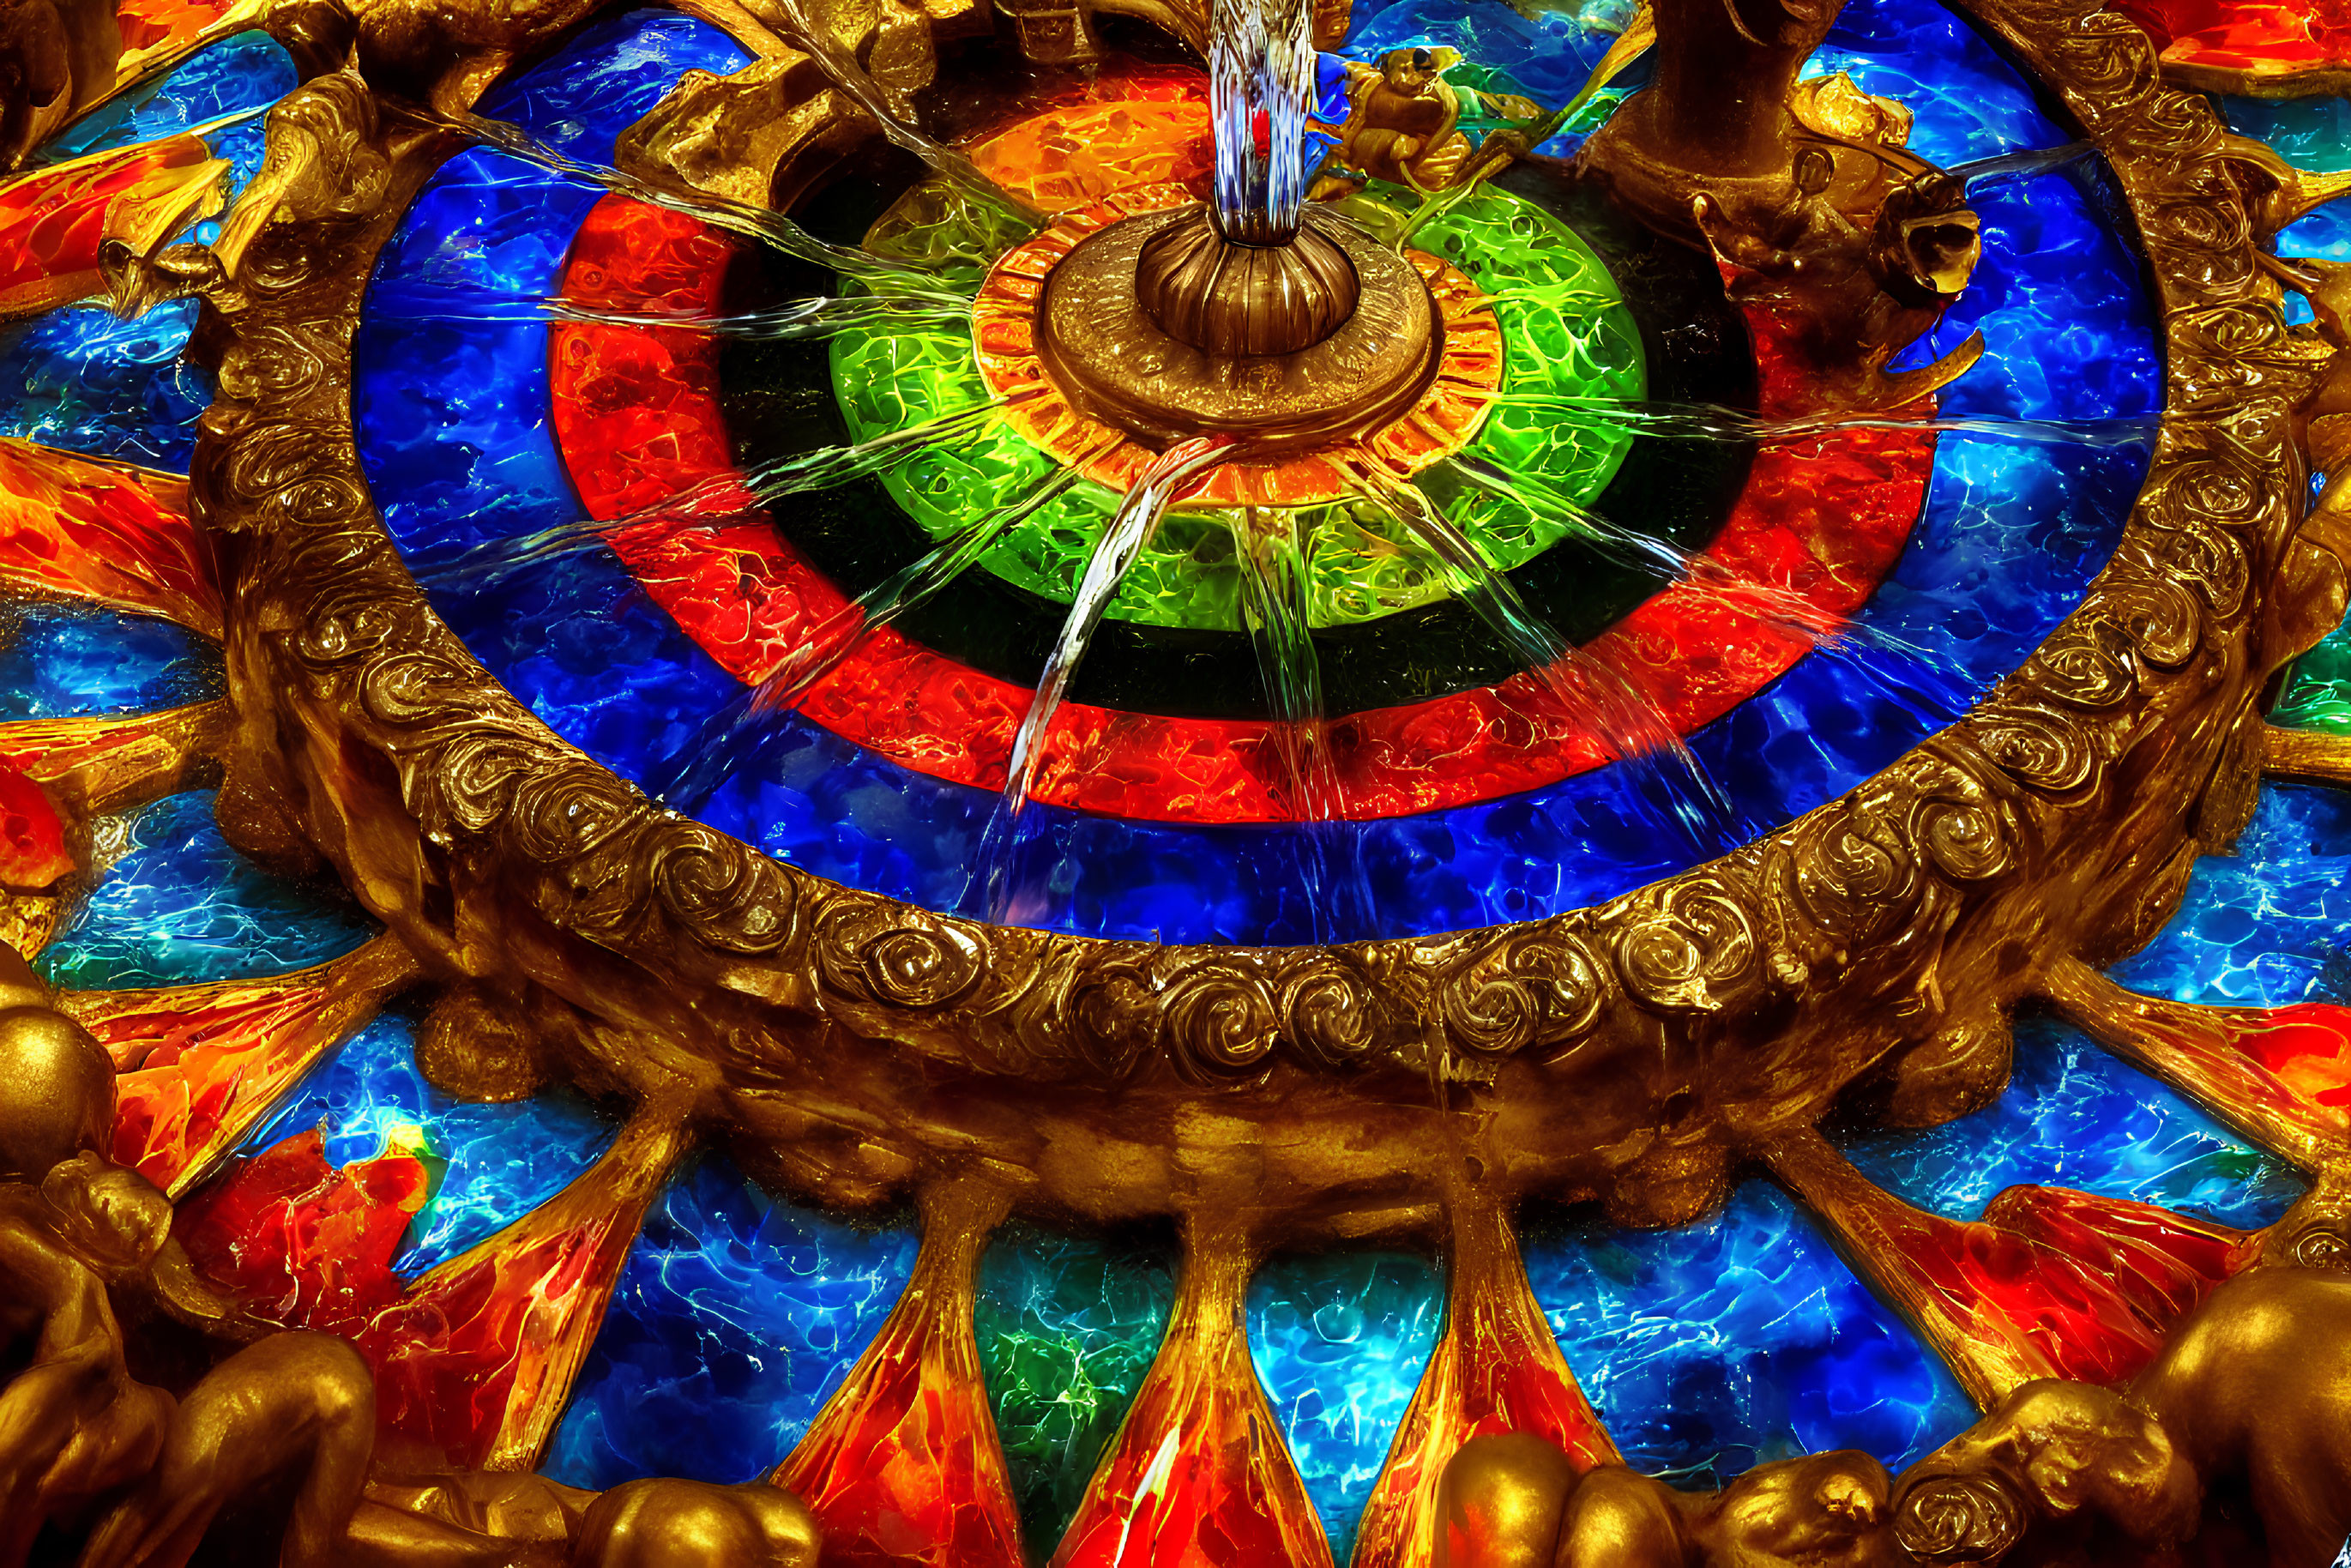 Colorful Mosaic Fountain with Golden Sculptures and Illuminated Glass